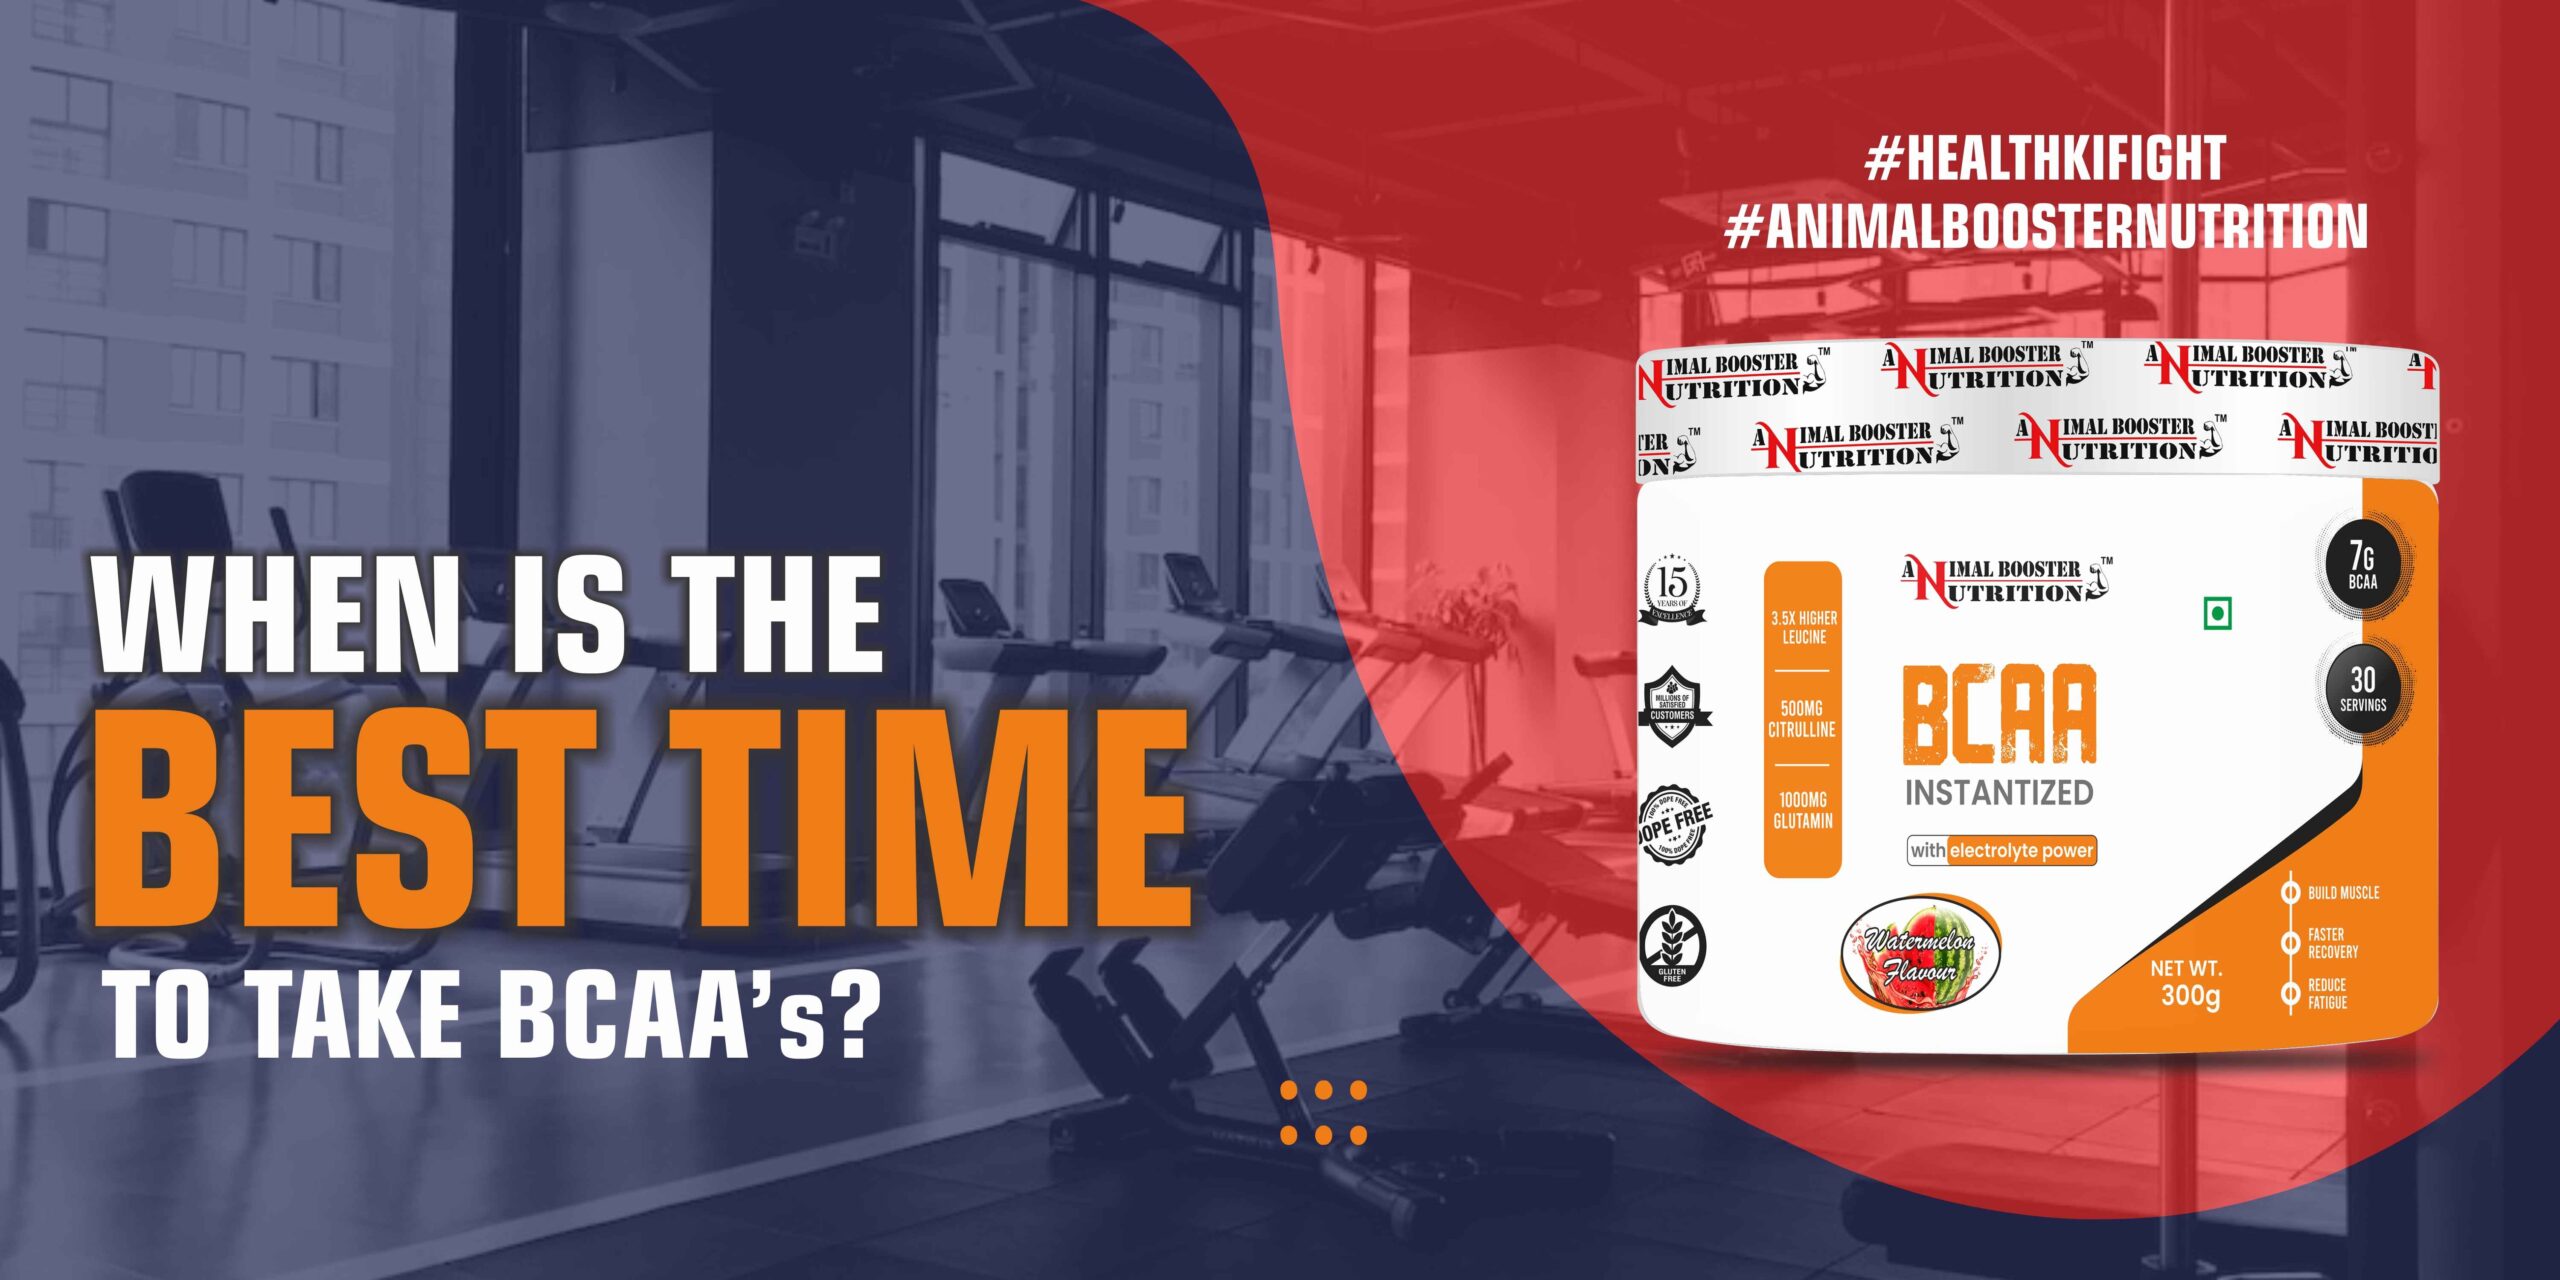 When is the best time to take BCAA